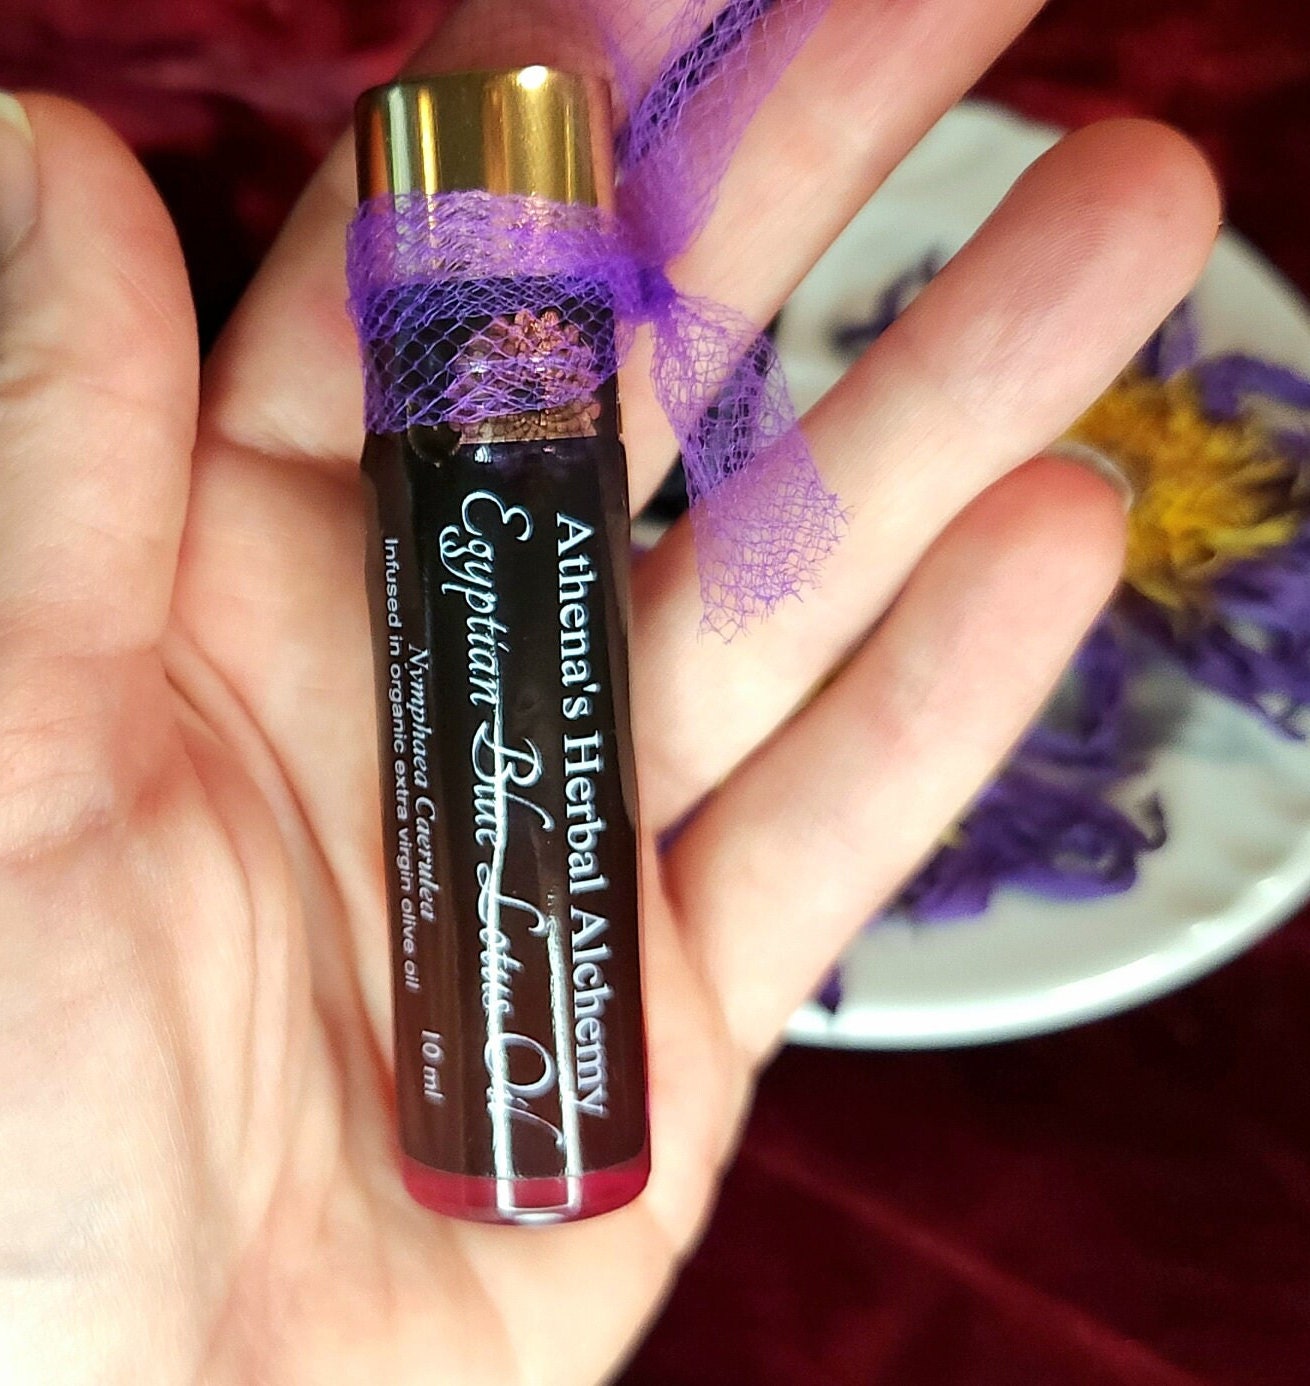 Egyption Blue Lotus Ritual, Lucid Dream,  Anointing  Oil~Jojoba and Extra Virgin Olive Oil